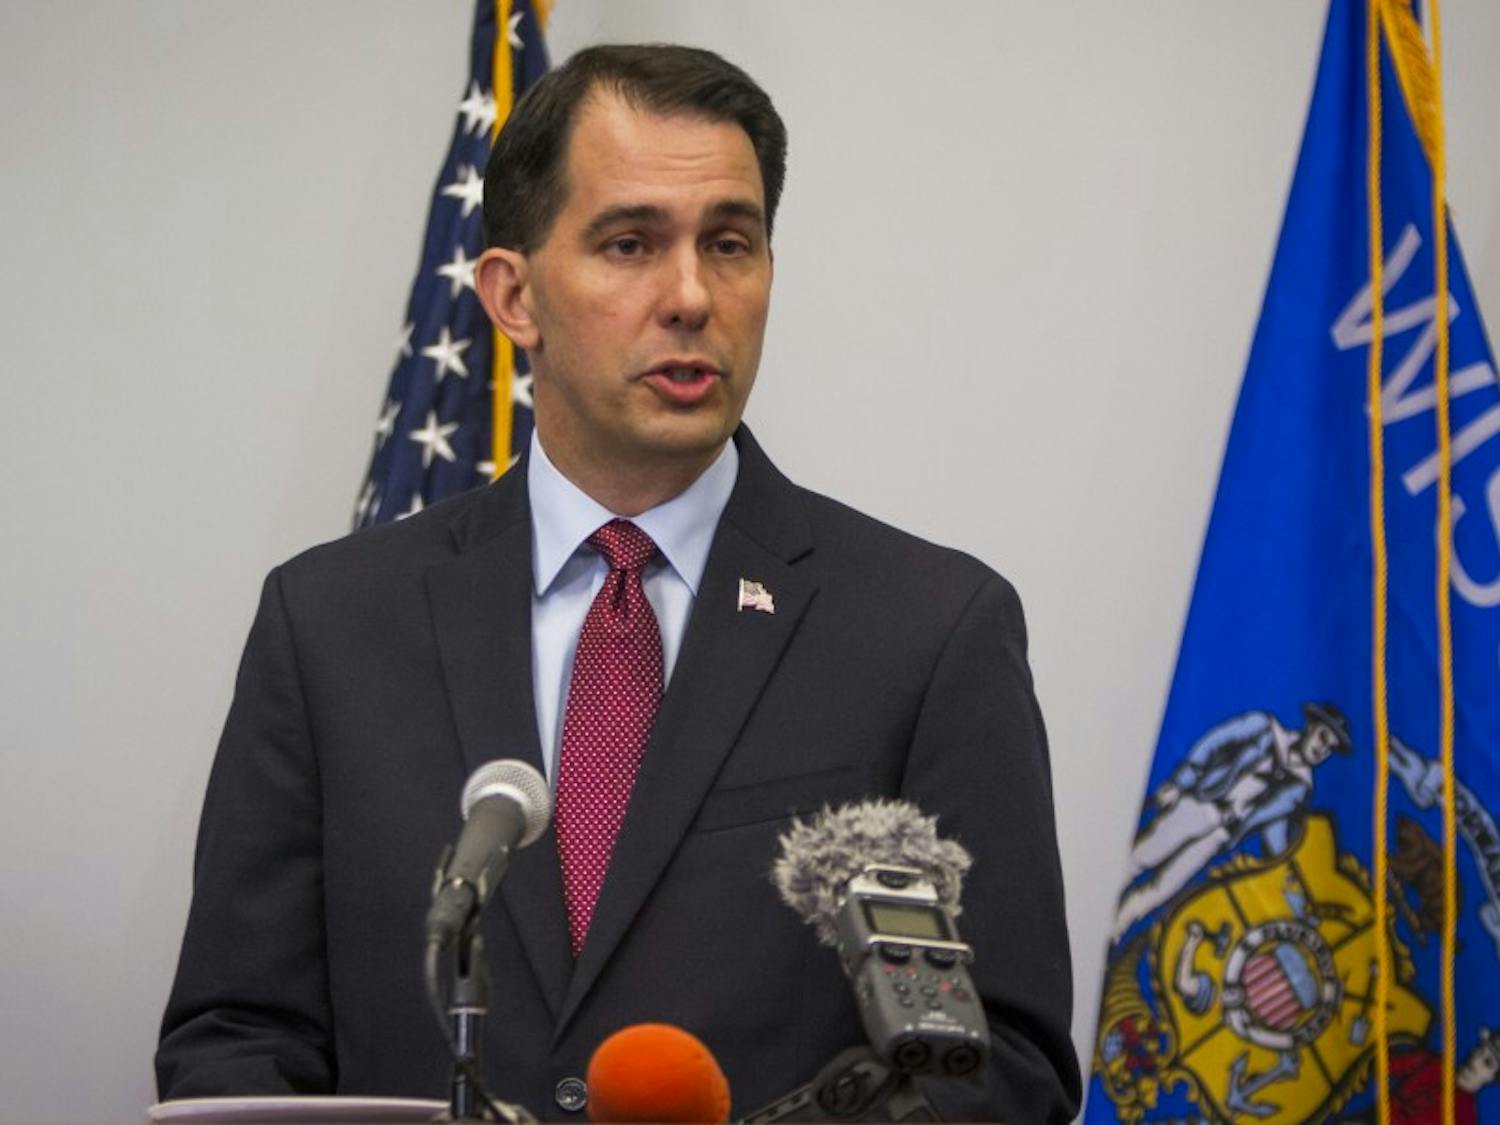 Gov. Scott Walker signed almost 60 bills into law Tuesday, including one making it easier for law enforcement to perform strip searches.